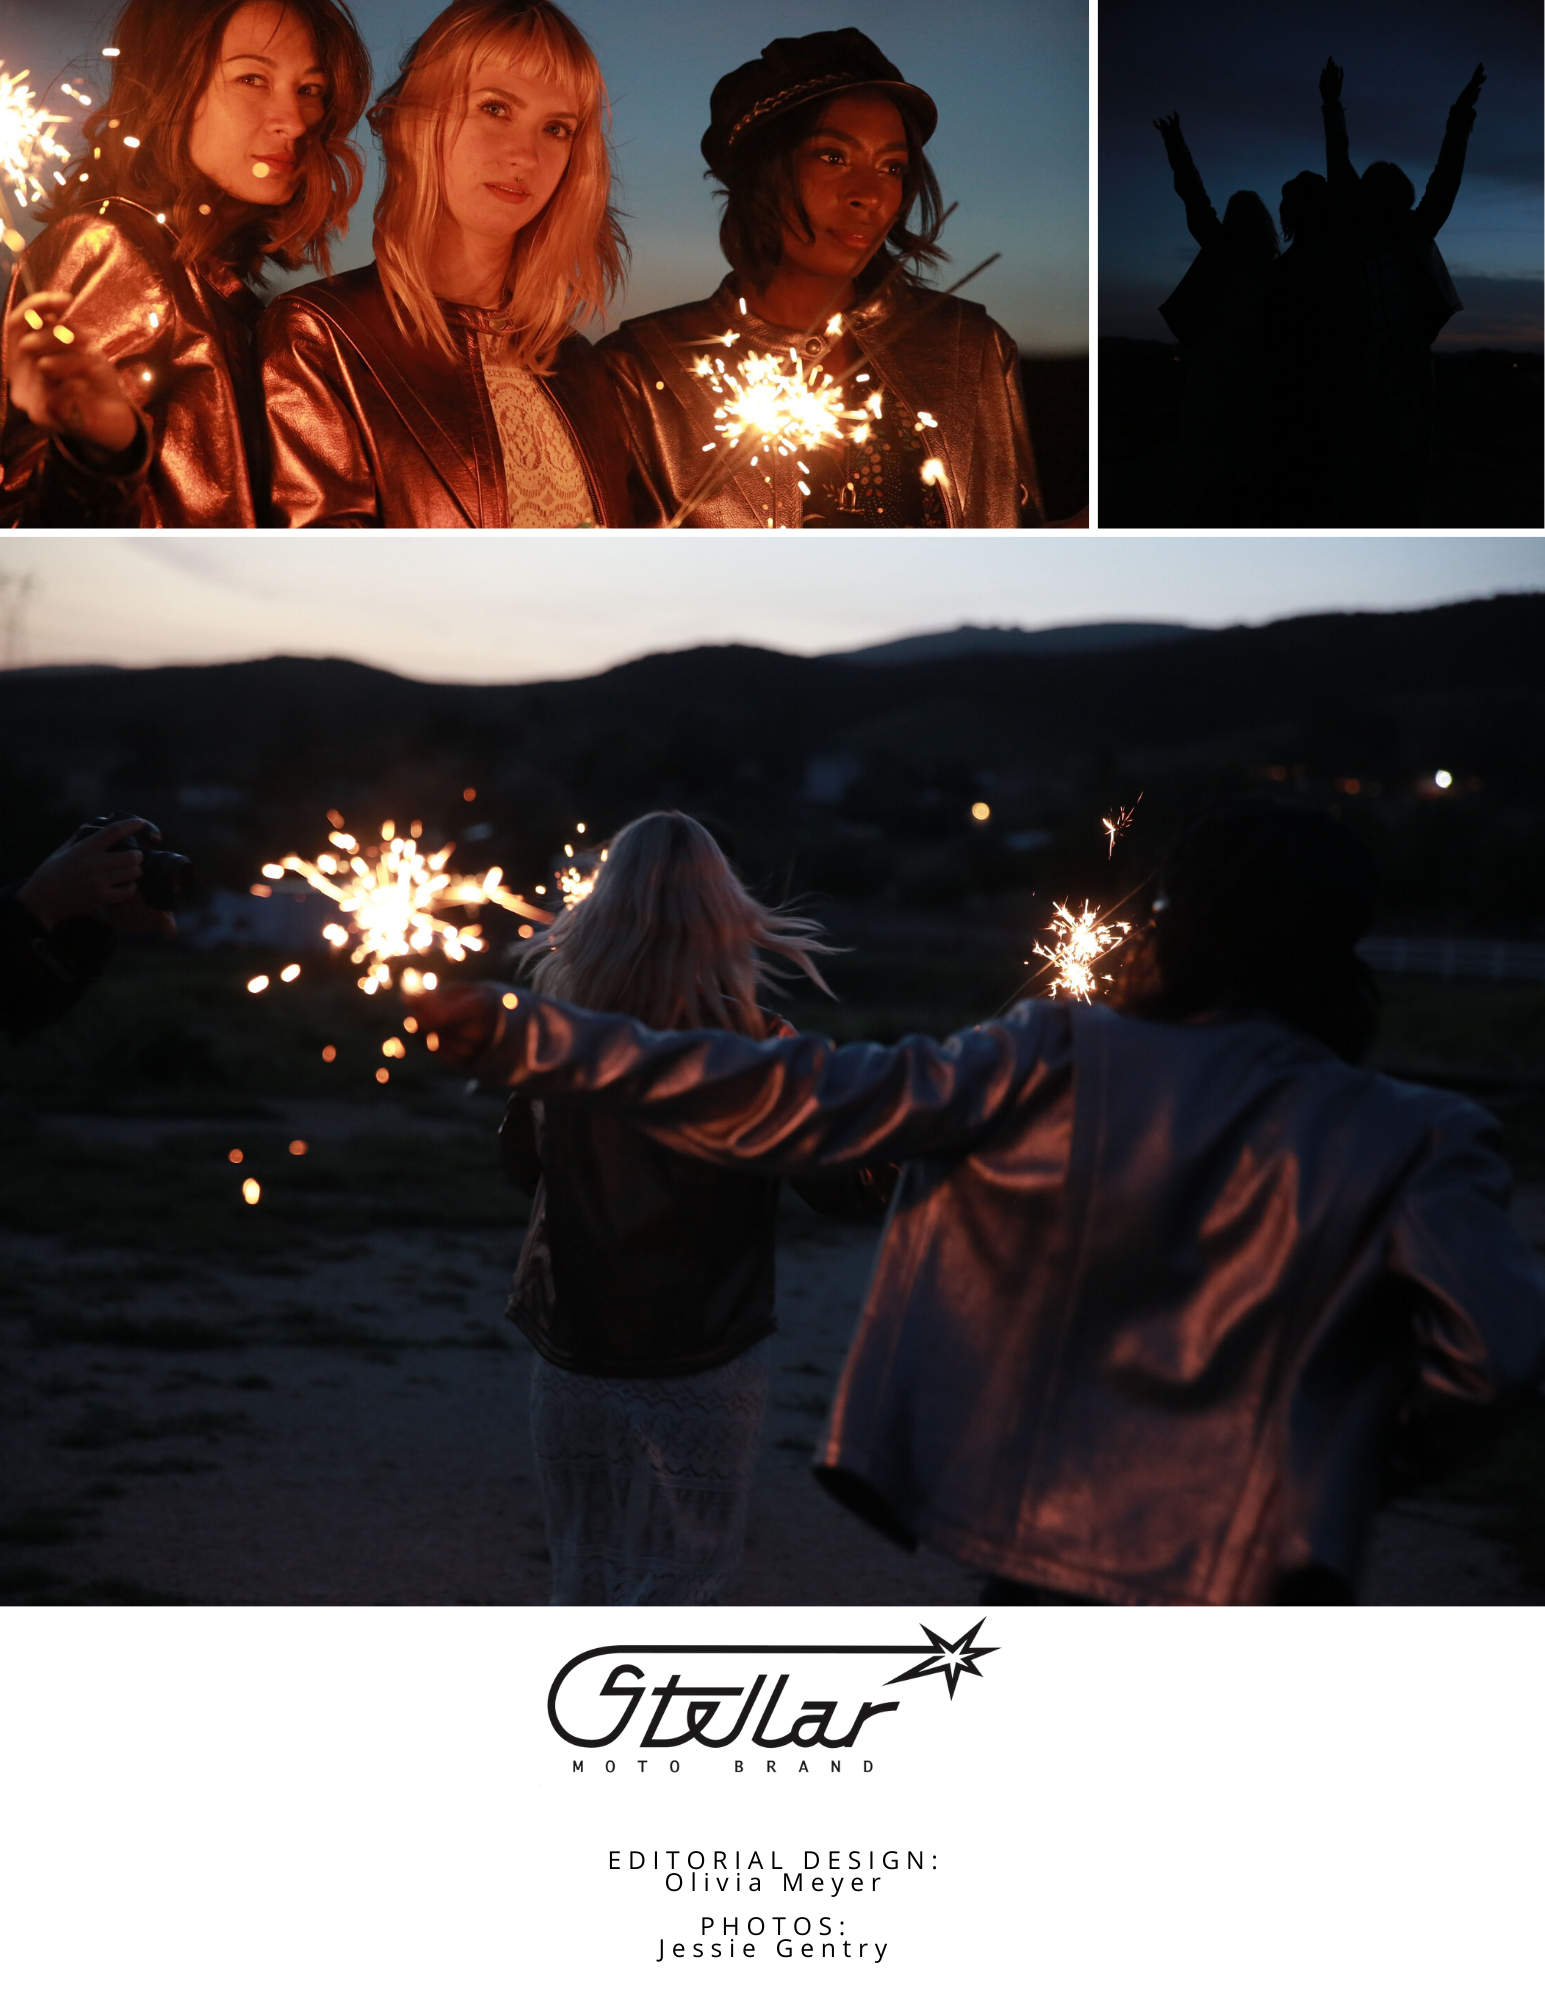 Closeup and action shot of motorcyclists with sparklers